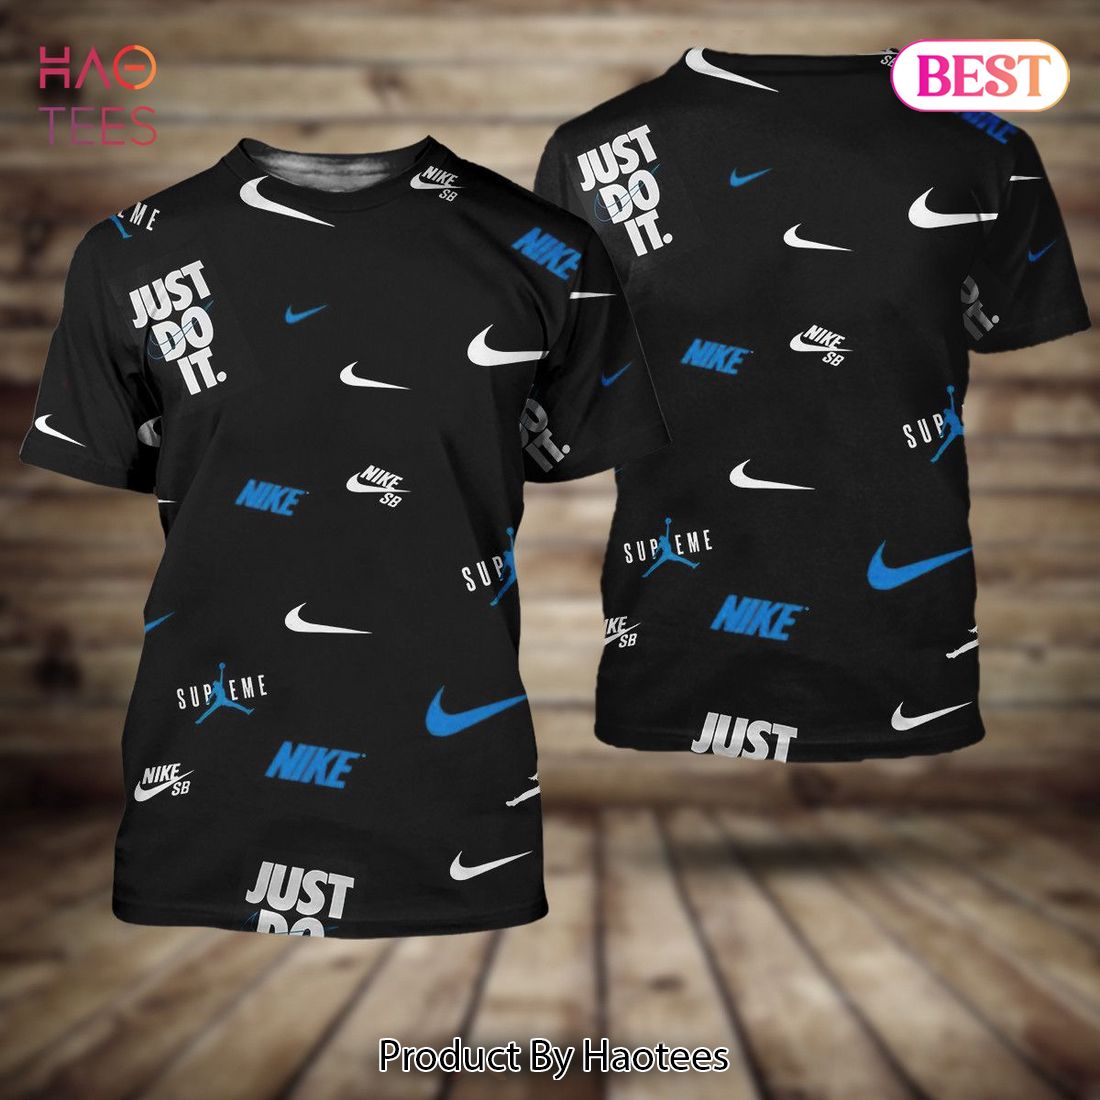 THE BEST Nike Blue White Black Luxury Brand 3D T-Shirt Limited Edition